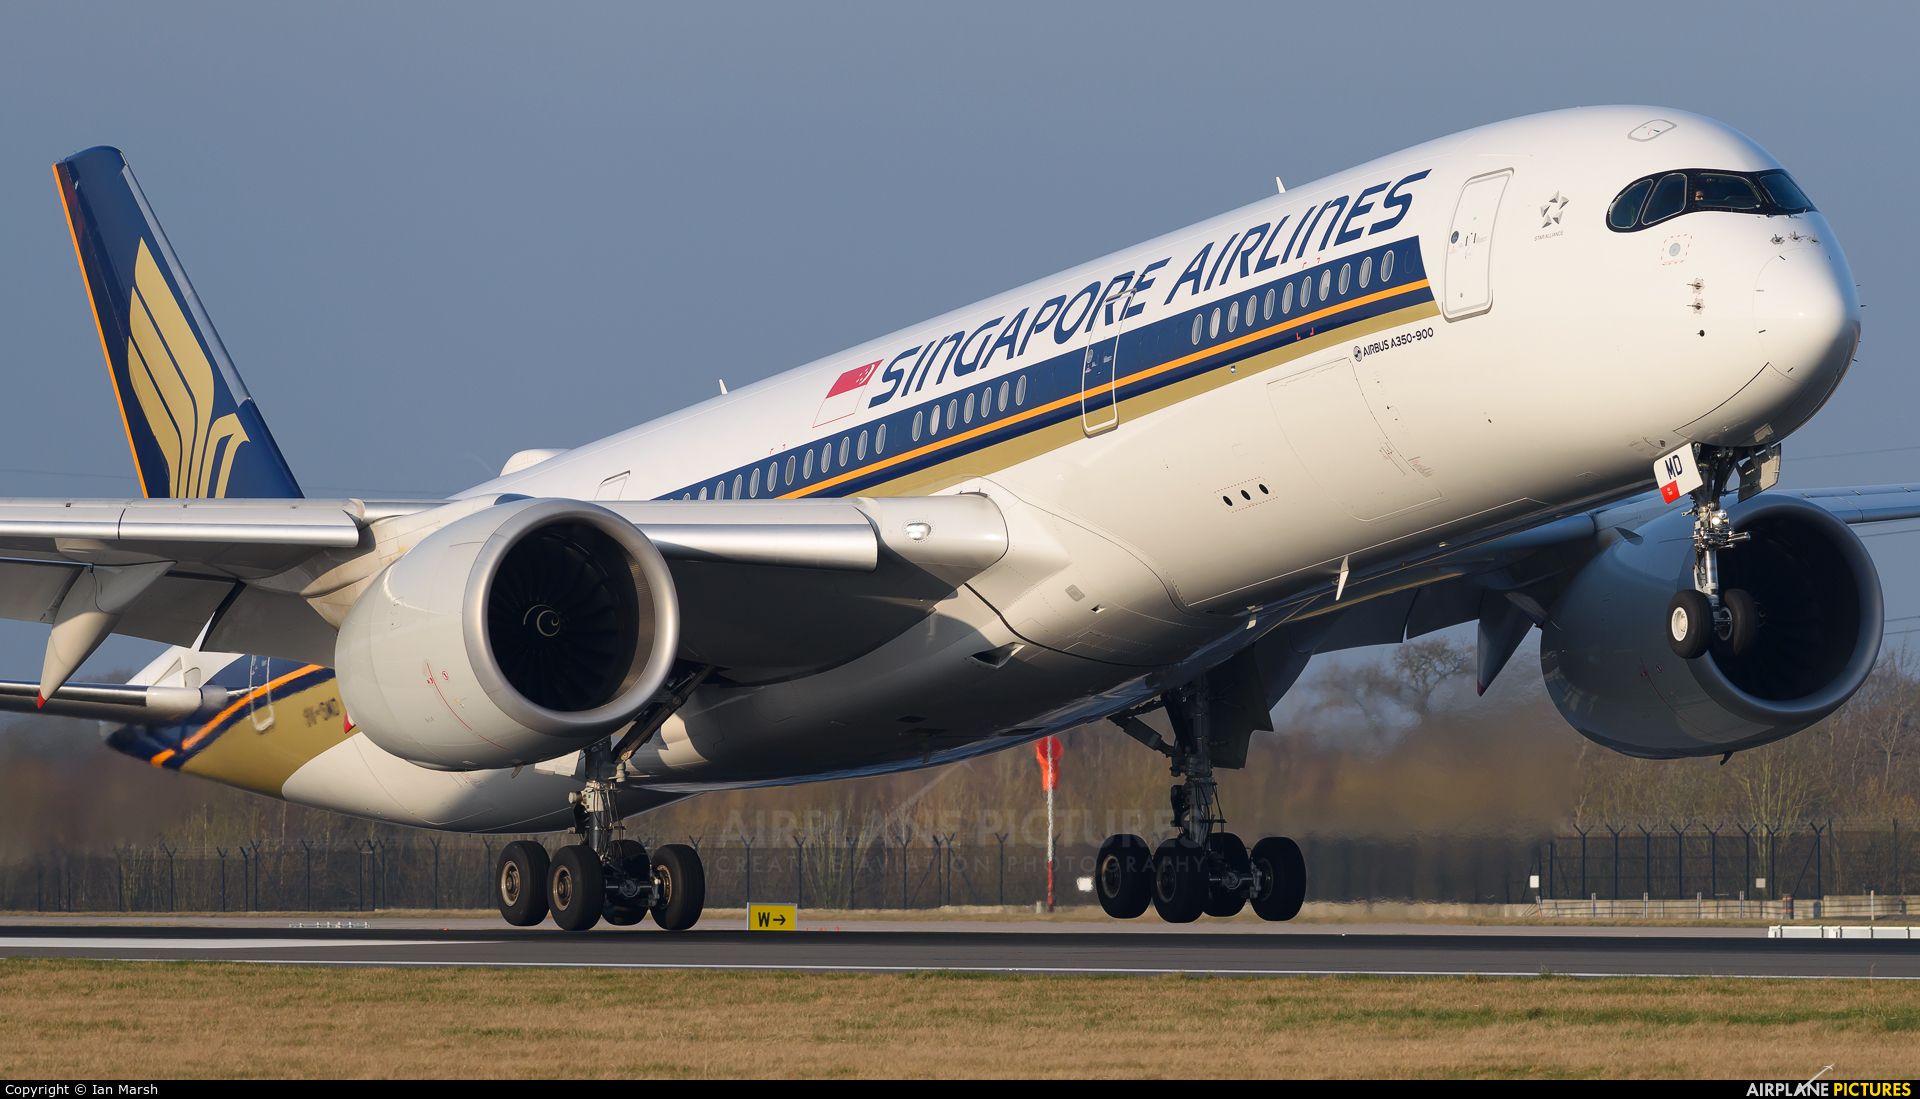 Singapore Airlines Wallpaper Free Singapore Airlines Background